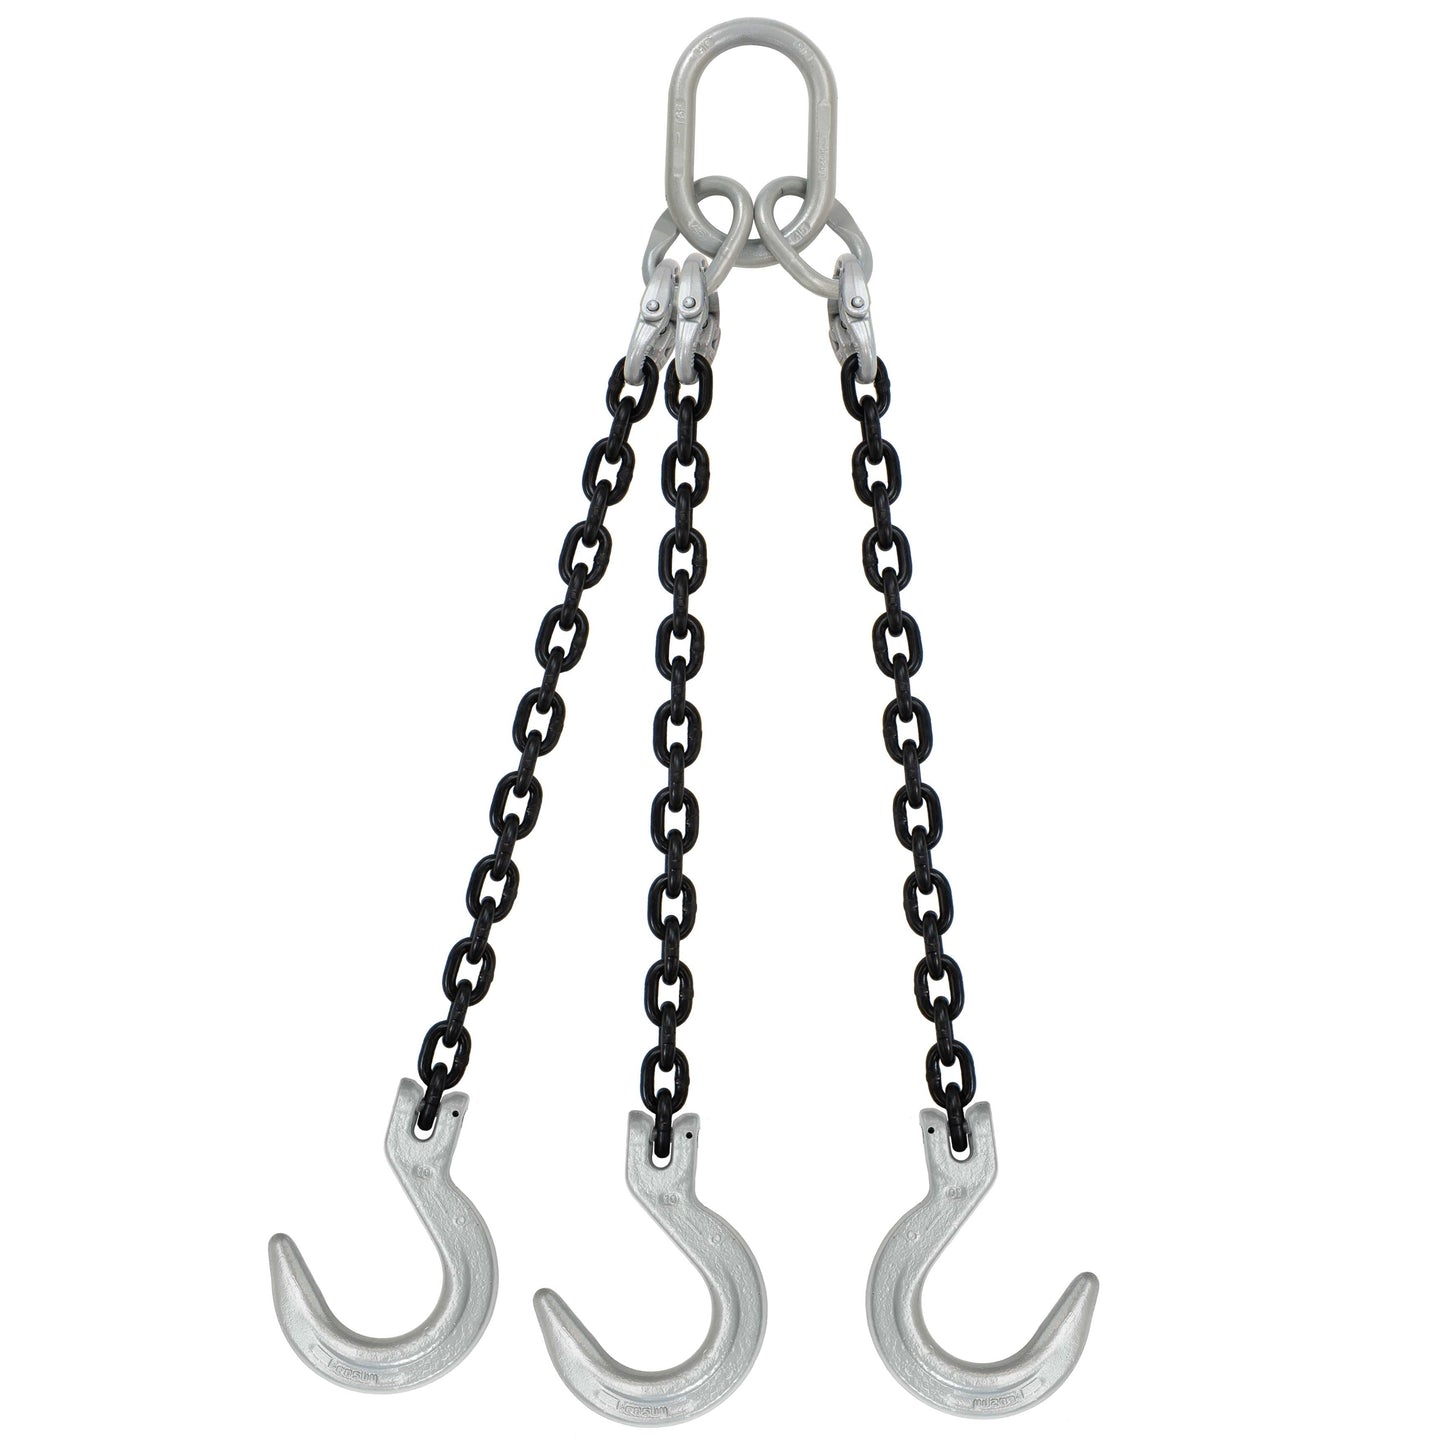 38 inch x 6 foot Domestic 3 Leg Chain Sling w Crosby Foundry Hooks Grade 100 image 1 of 2